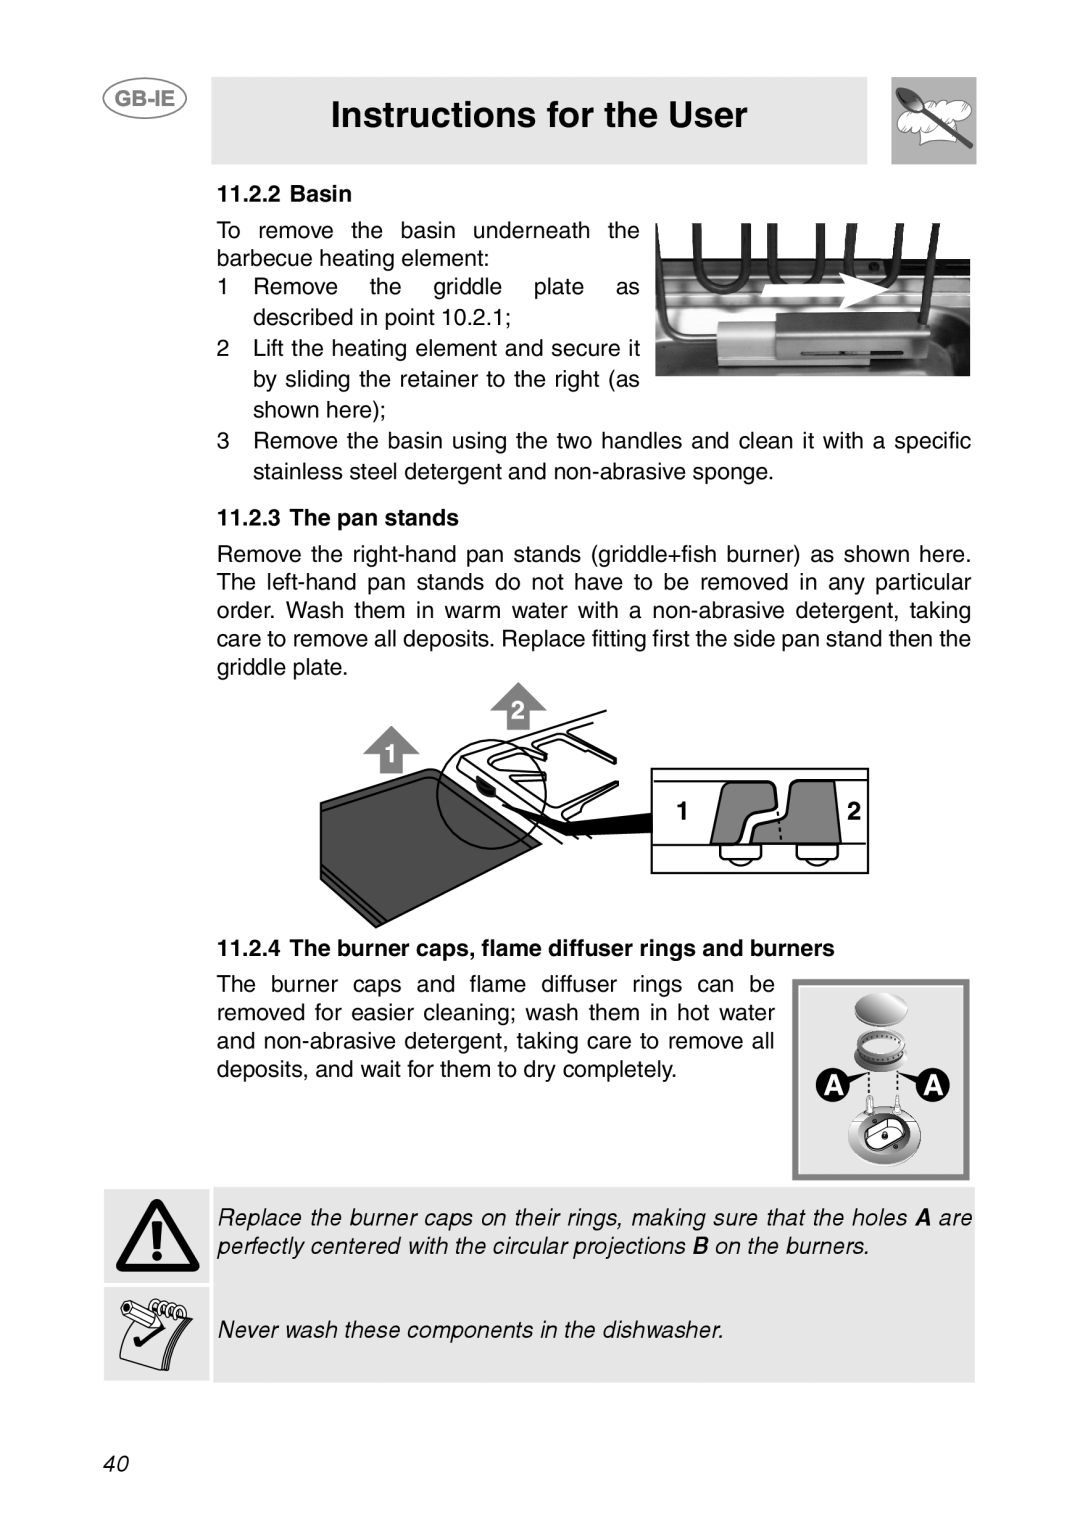 Smeg CS150SA manual Instructions for the User, Basin, The pan stands, Never wash these components in the dishwasher 